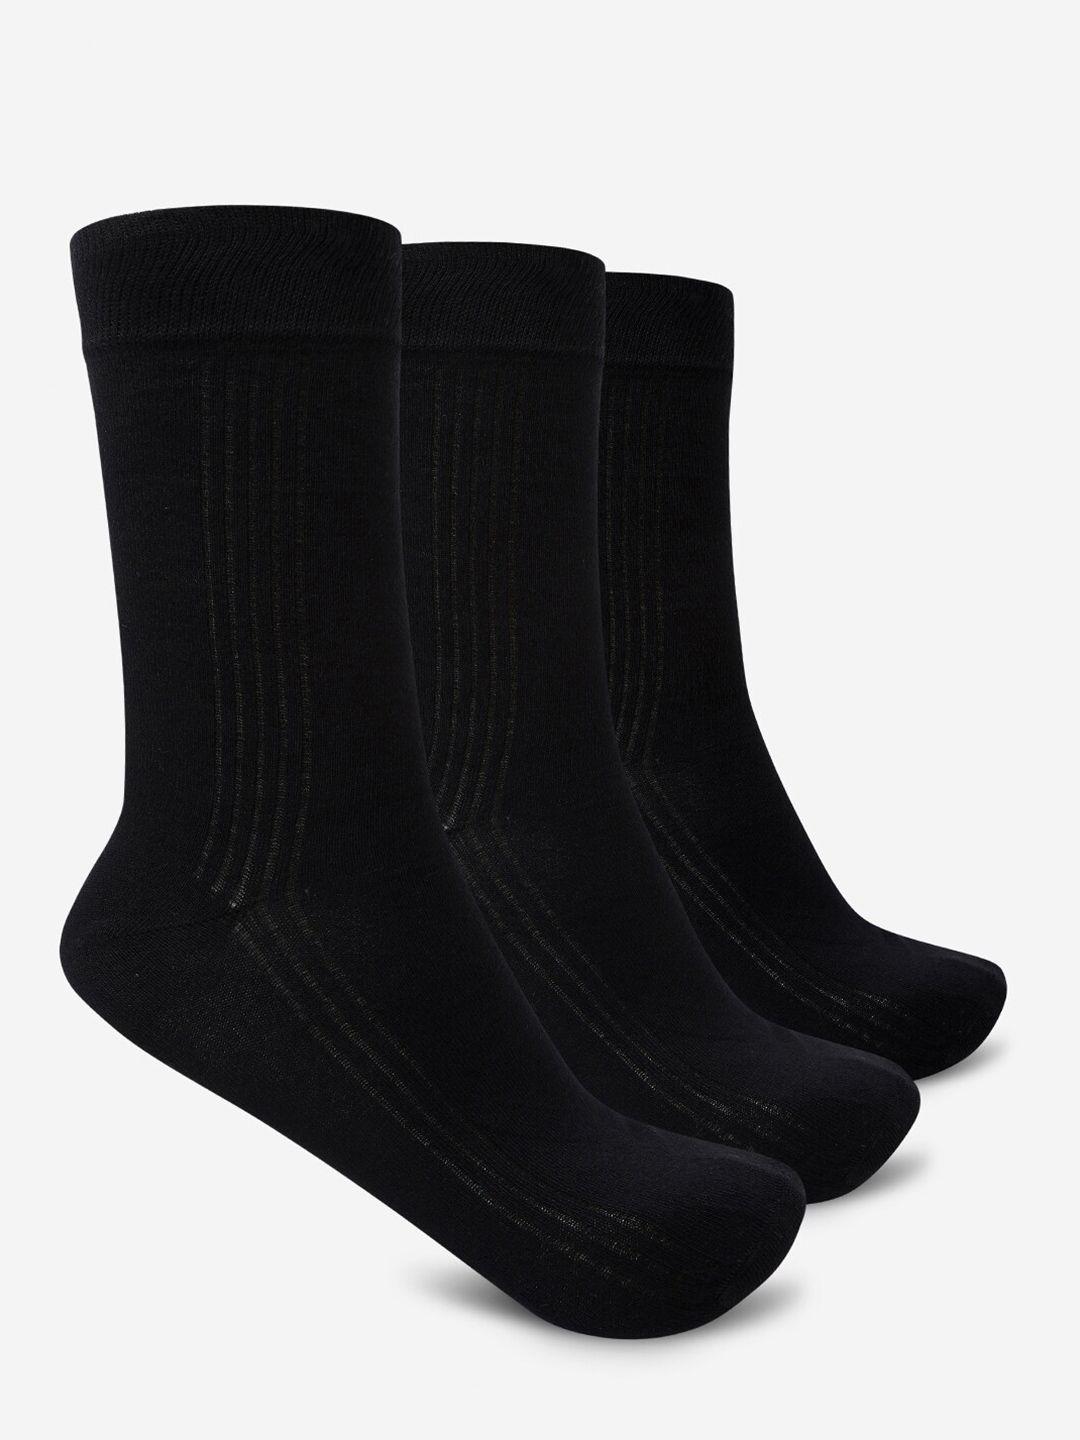 smarty pants unisex pack of 3 black solid calf length cotton socks